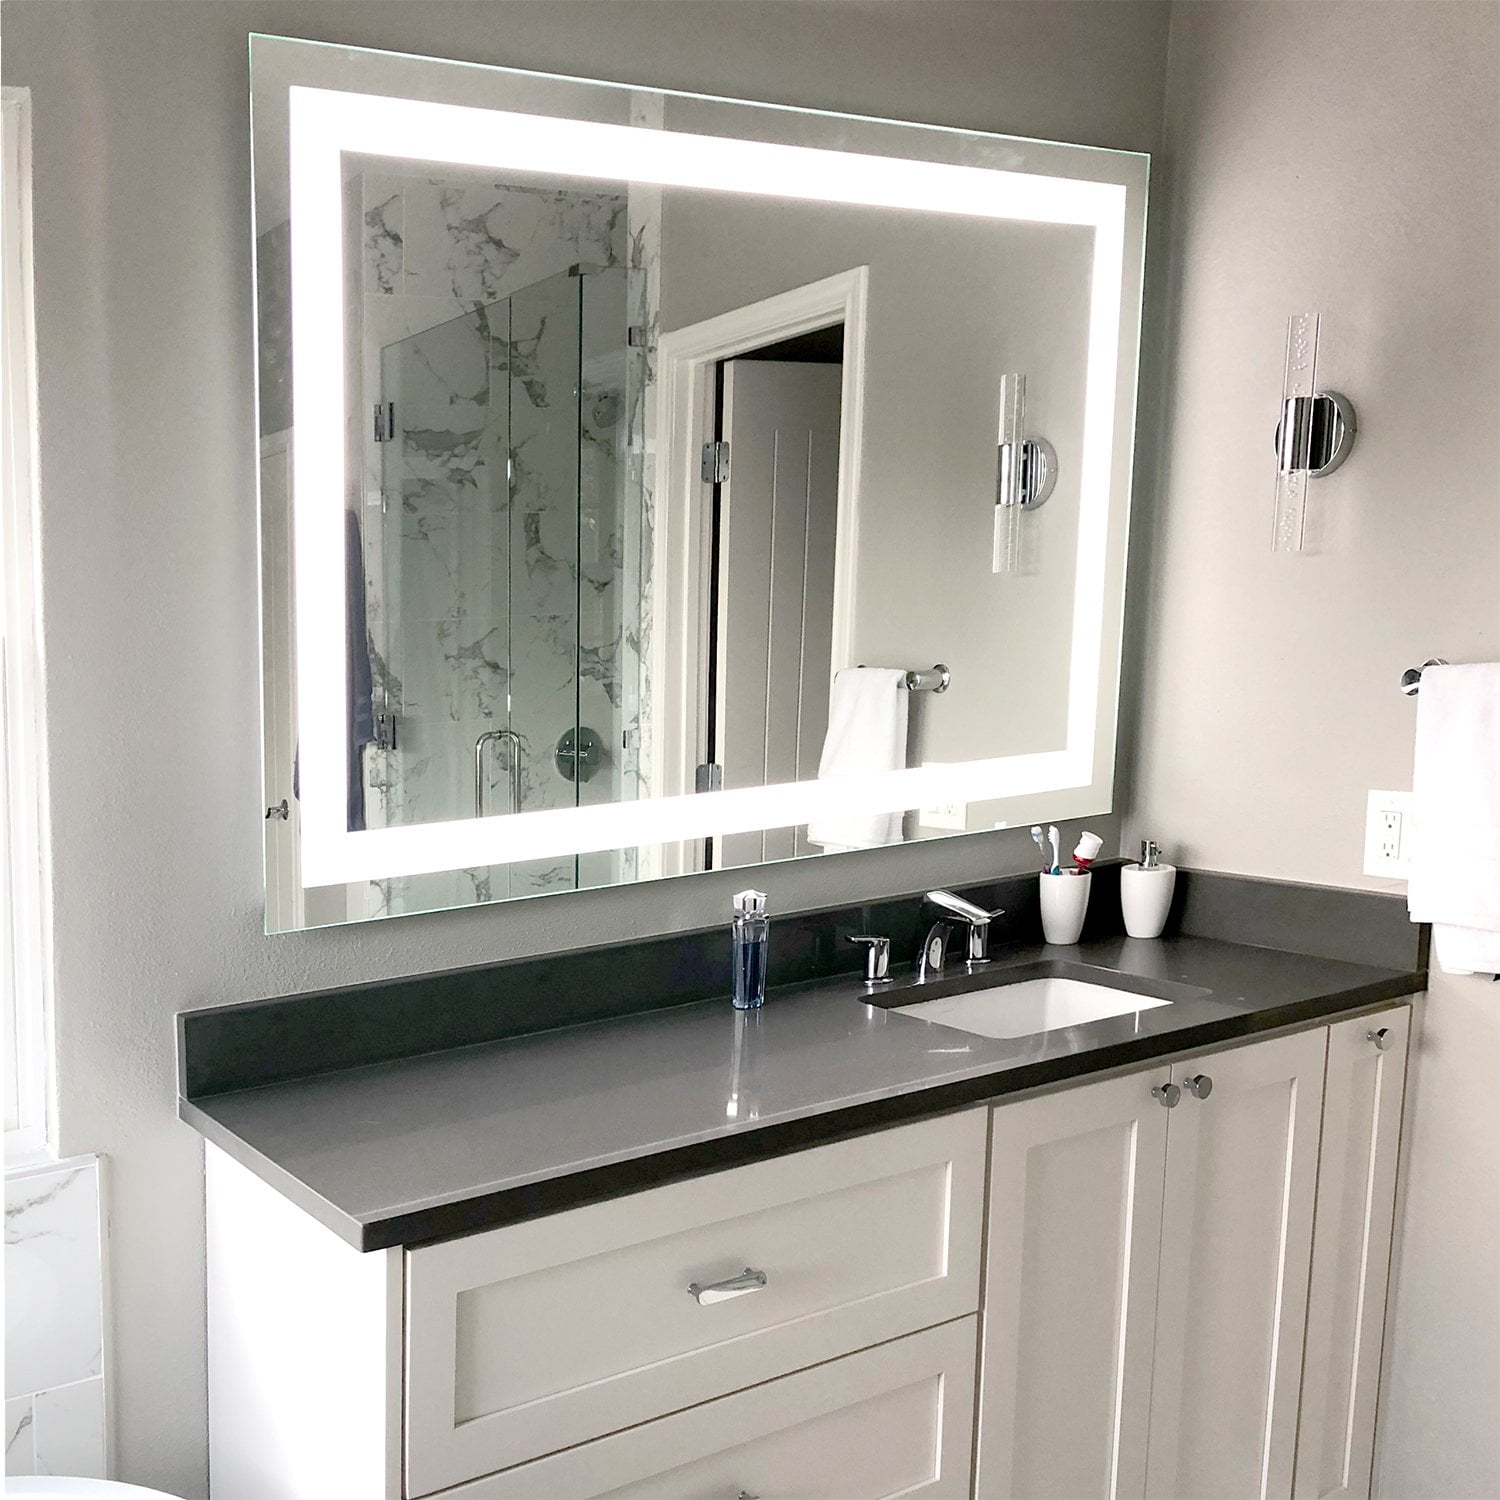 Rectangular Led Front Lighted Bathroom Vanity Mirror 24 Wide X 32 Tall Commercial Grade Wall Mounted